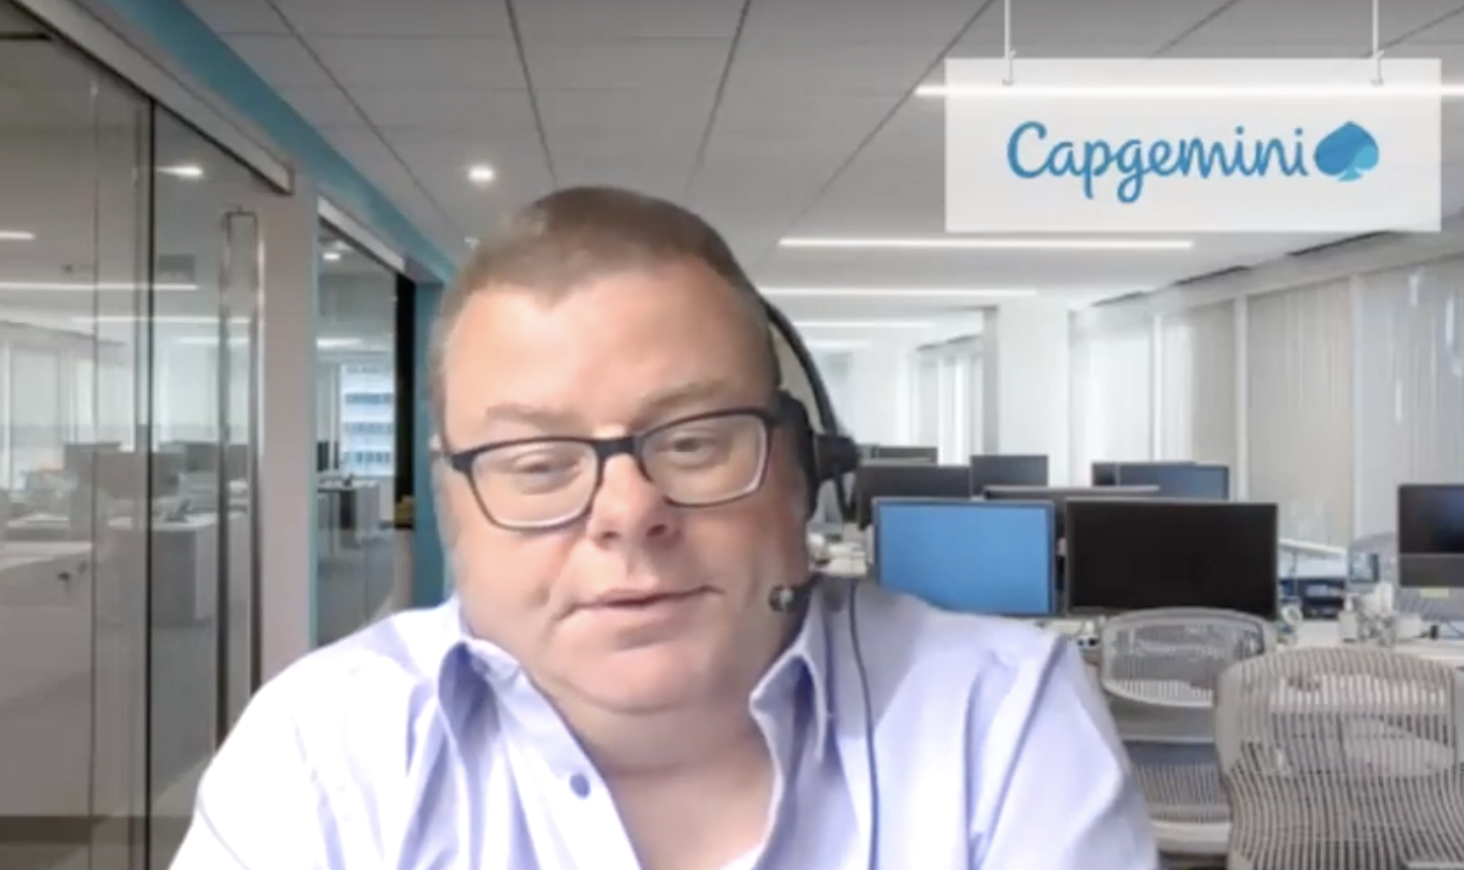 Man sitting in office with the word 'Capgemini' on a board in the background